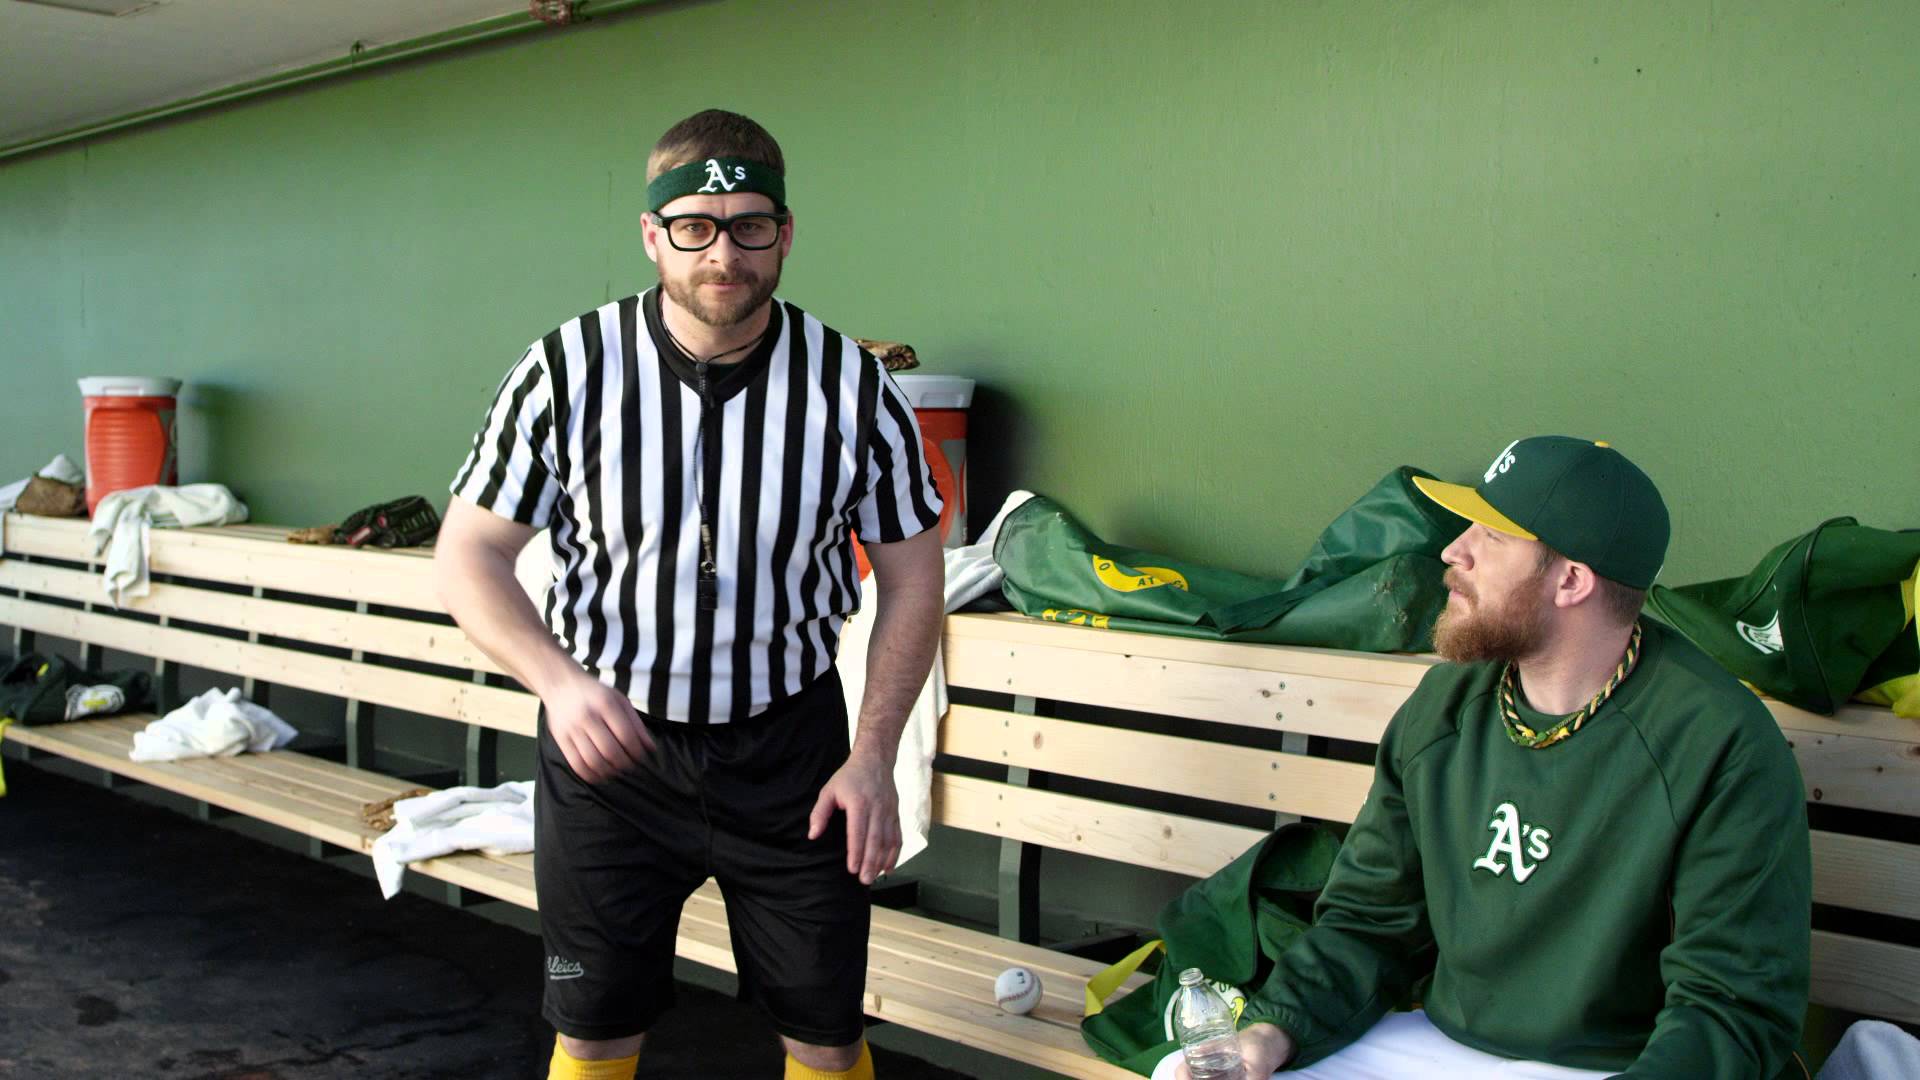 Stephen Vogt is the clubhouse NBA ref for the Oakland A's